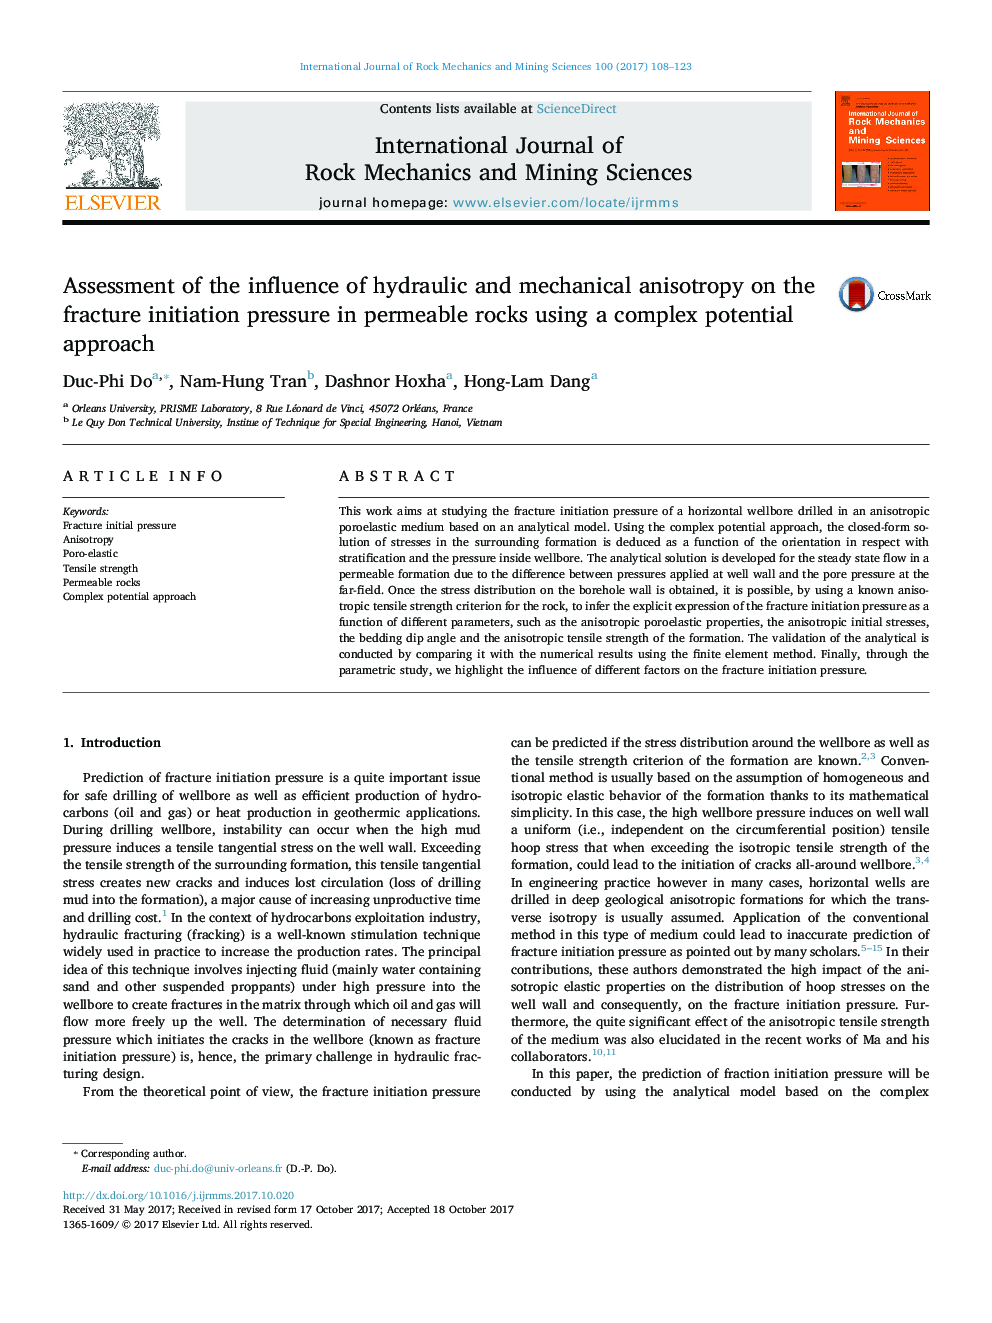 Assessment of the influence of hydraulic and mechanical anisotropy on the fracture initiation pressure in permeable rocks using a complex potential approach